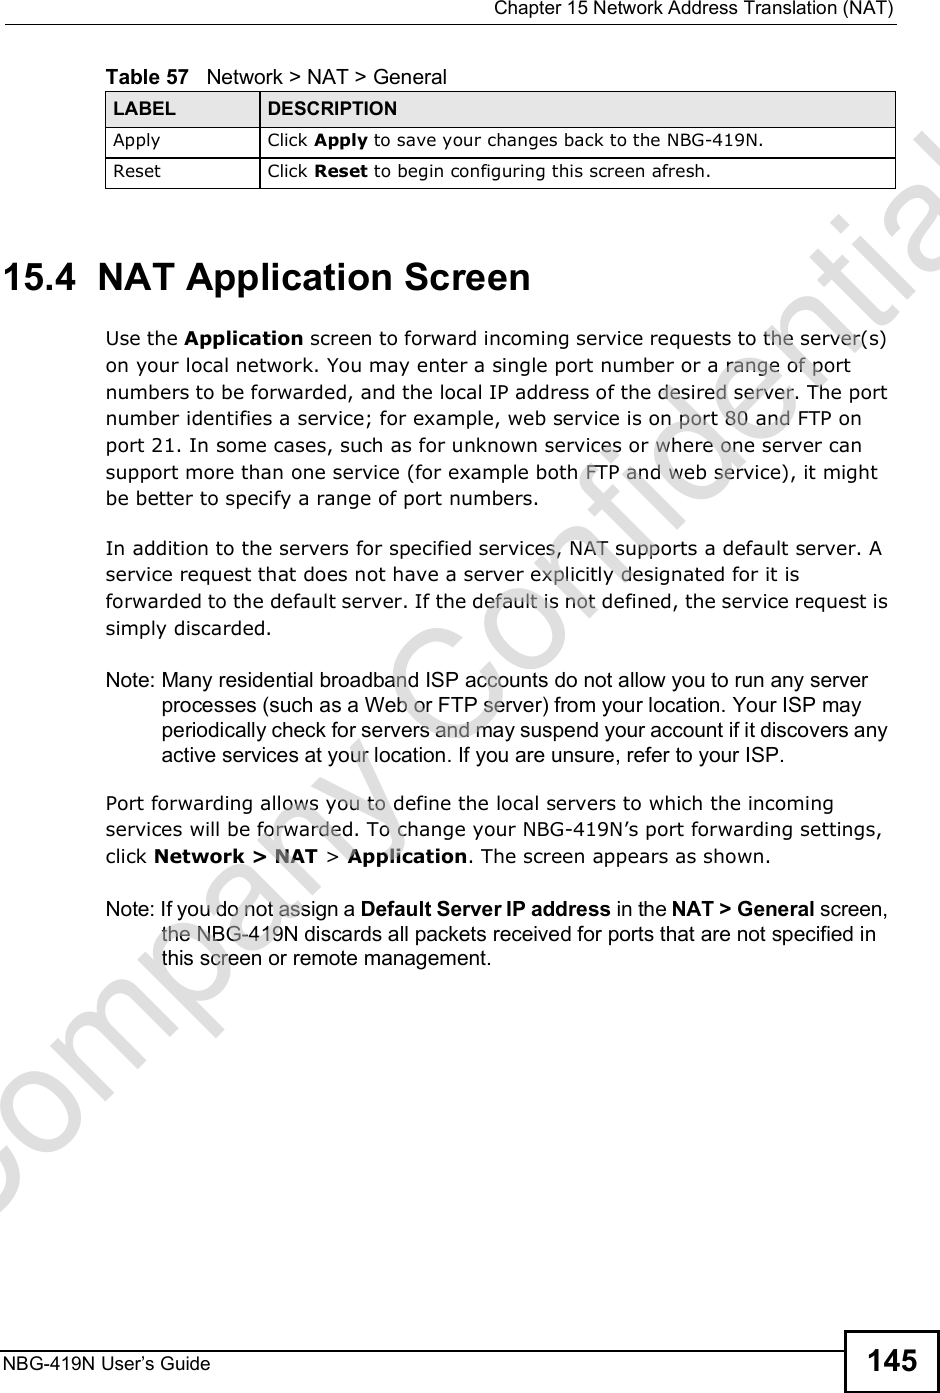  Chapter 15Network Address Translation (NAT)NBG-419N User s Guide 14515.4  NAT Application Screen   Use the Application screen to forward incoming service requests to the server(s) on your local network. You may enter a single port number or a range of port numbers to be forwarded, and the local IP address of the desired server. The port number identifies a service; for example, web service is on port 80 and FTP on port 21. In some cases, such as for unknown services or where one server can support more than one service (for example both FTP and web service), it might be better to specify a range of port numbers.In addition to the servers for specified services, NAT supports a default server. A service request that does not have a server explicitly designated for it is forwarded to the default server. If the default is not defined, the service request is simply discarded.Note: Many residential broadband ISP accounts do not allow you to run any server processes (such as a Web or FTP server) from your location. Your ISP may periodically check for servers and may suspend your account if it discovers any active services at your location. If you are unsure, refer to your ISP.Port forwarding allows you to define the local servers to which the incoming services will be forwarded. To change your NBG-419N!s port forwarding settings, click Network &gt; NAT &gt; Application. The screen appears as shown.Note: If you do not assign a Default Server IP address in the NAT &gt; General screen, the NBG-419N discards all packets received for ports that are not specified in this screen or remote management.Apply Click Apply to save your changes back to the NBG-419N.Reset Click Reset to begin configuring this screen afresh.Table 57   Network &gt; NAT &gt; GeneralLABEL DESCRIPTIONCompany Confidential